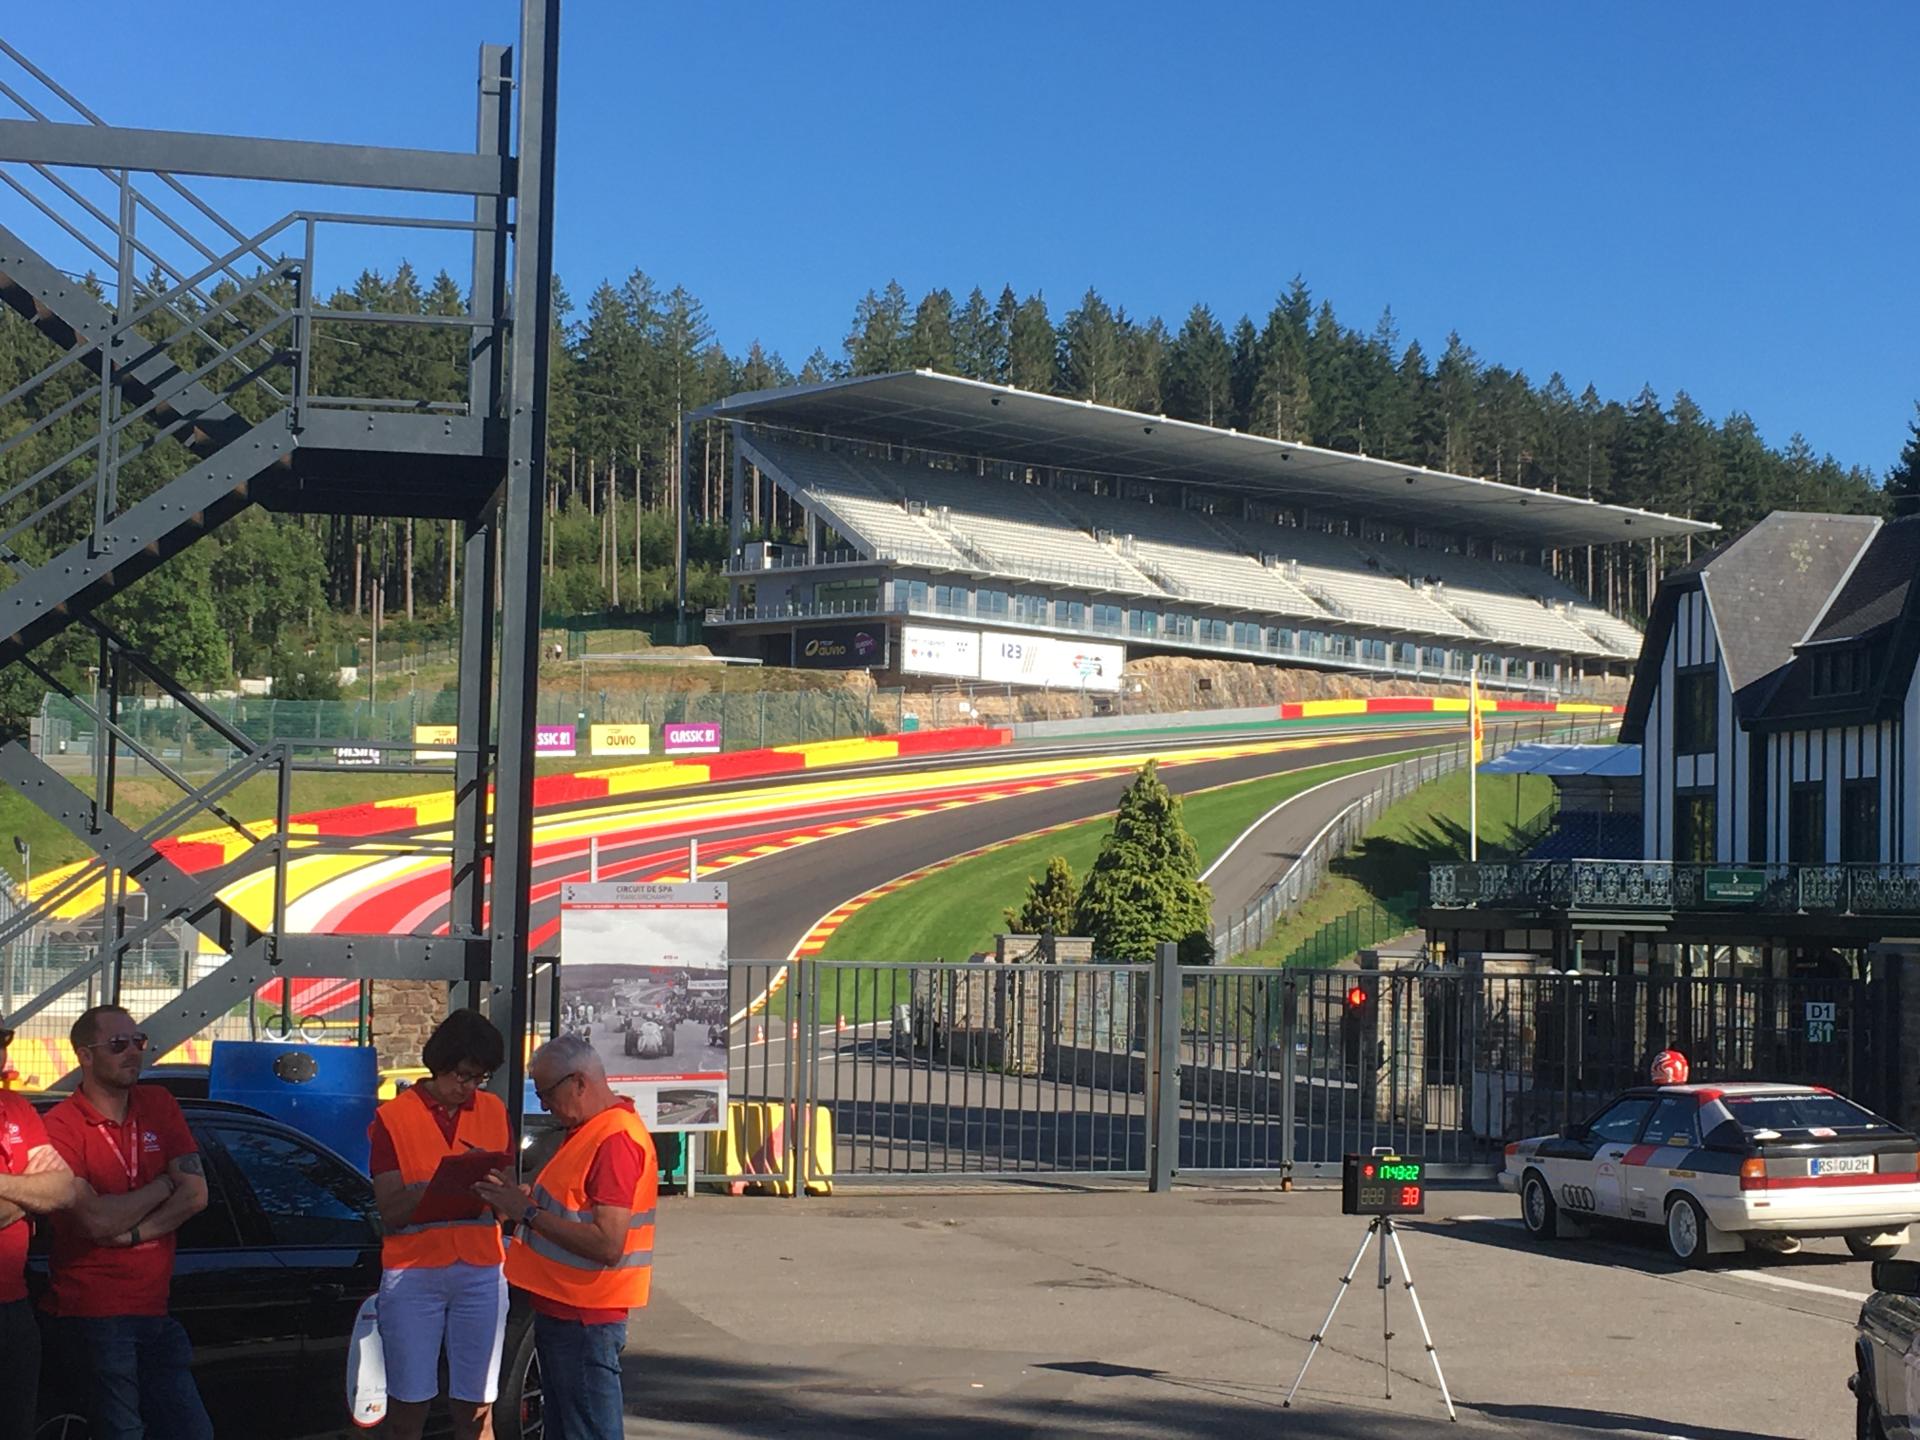 Spa - 2 minutes to go